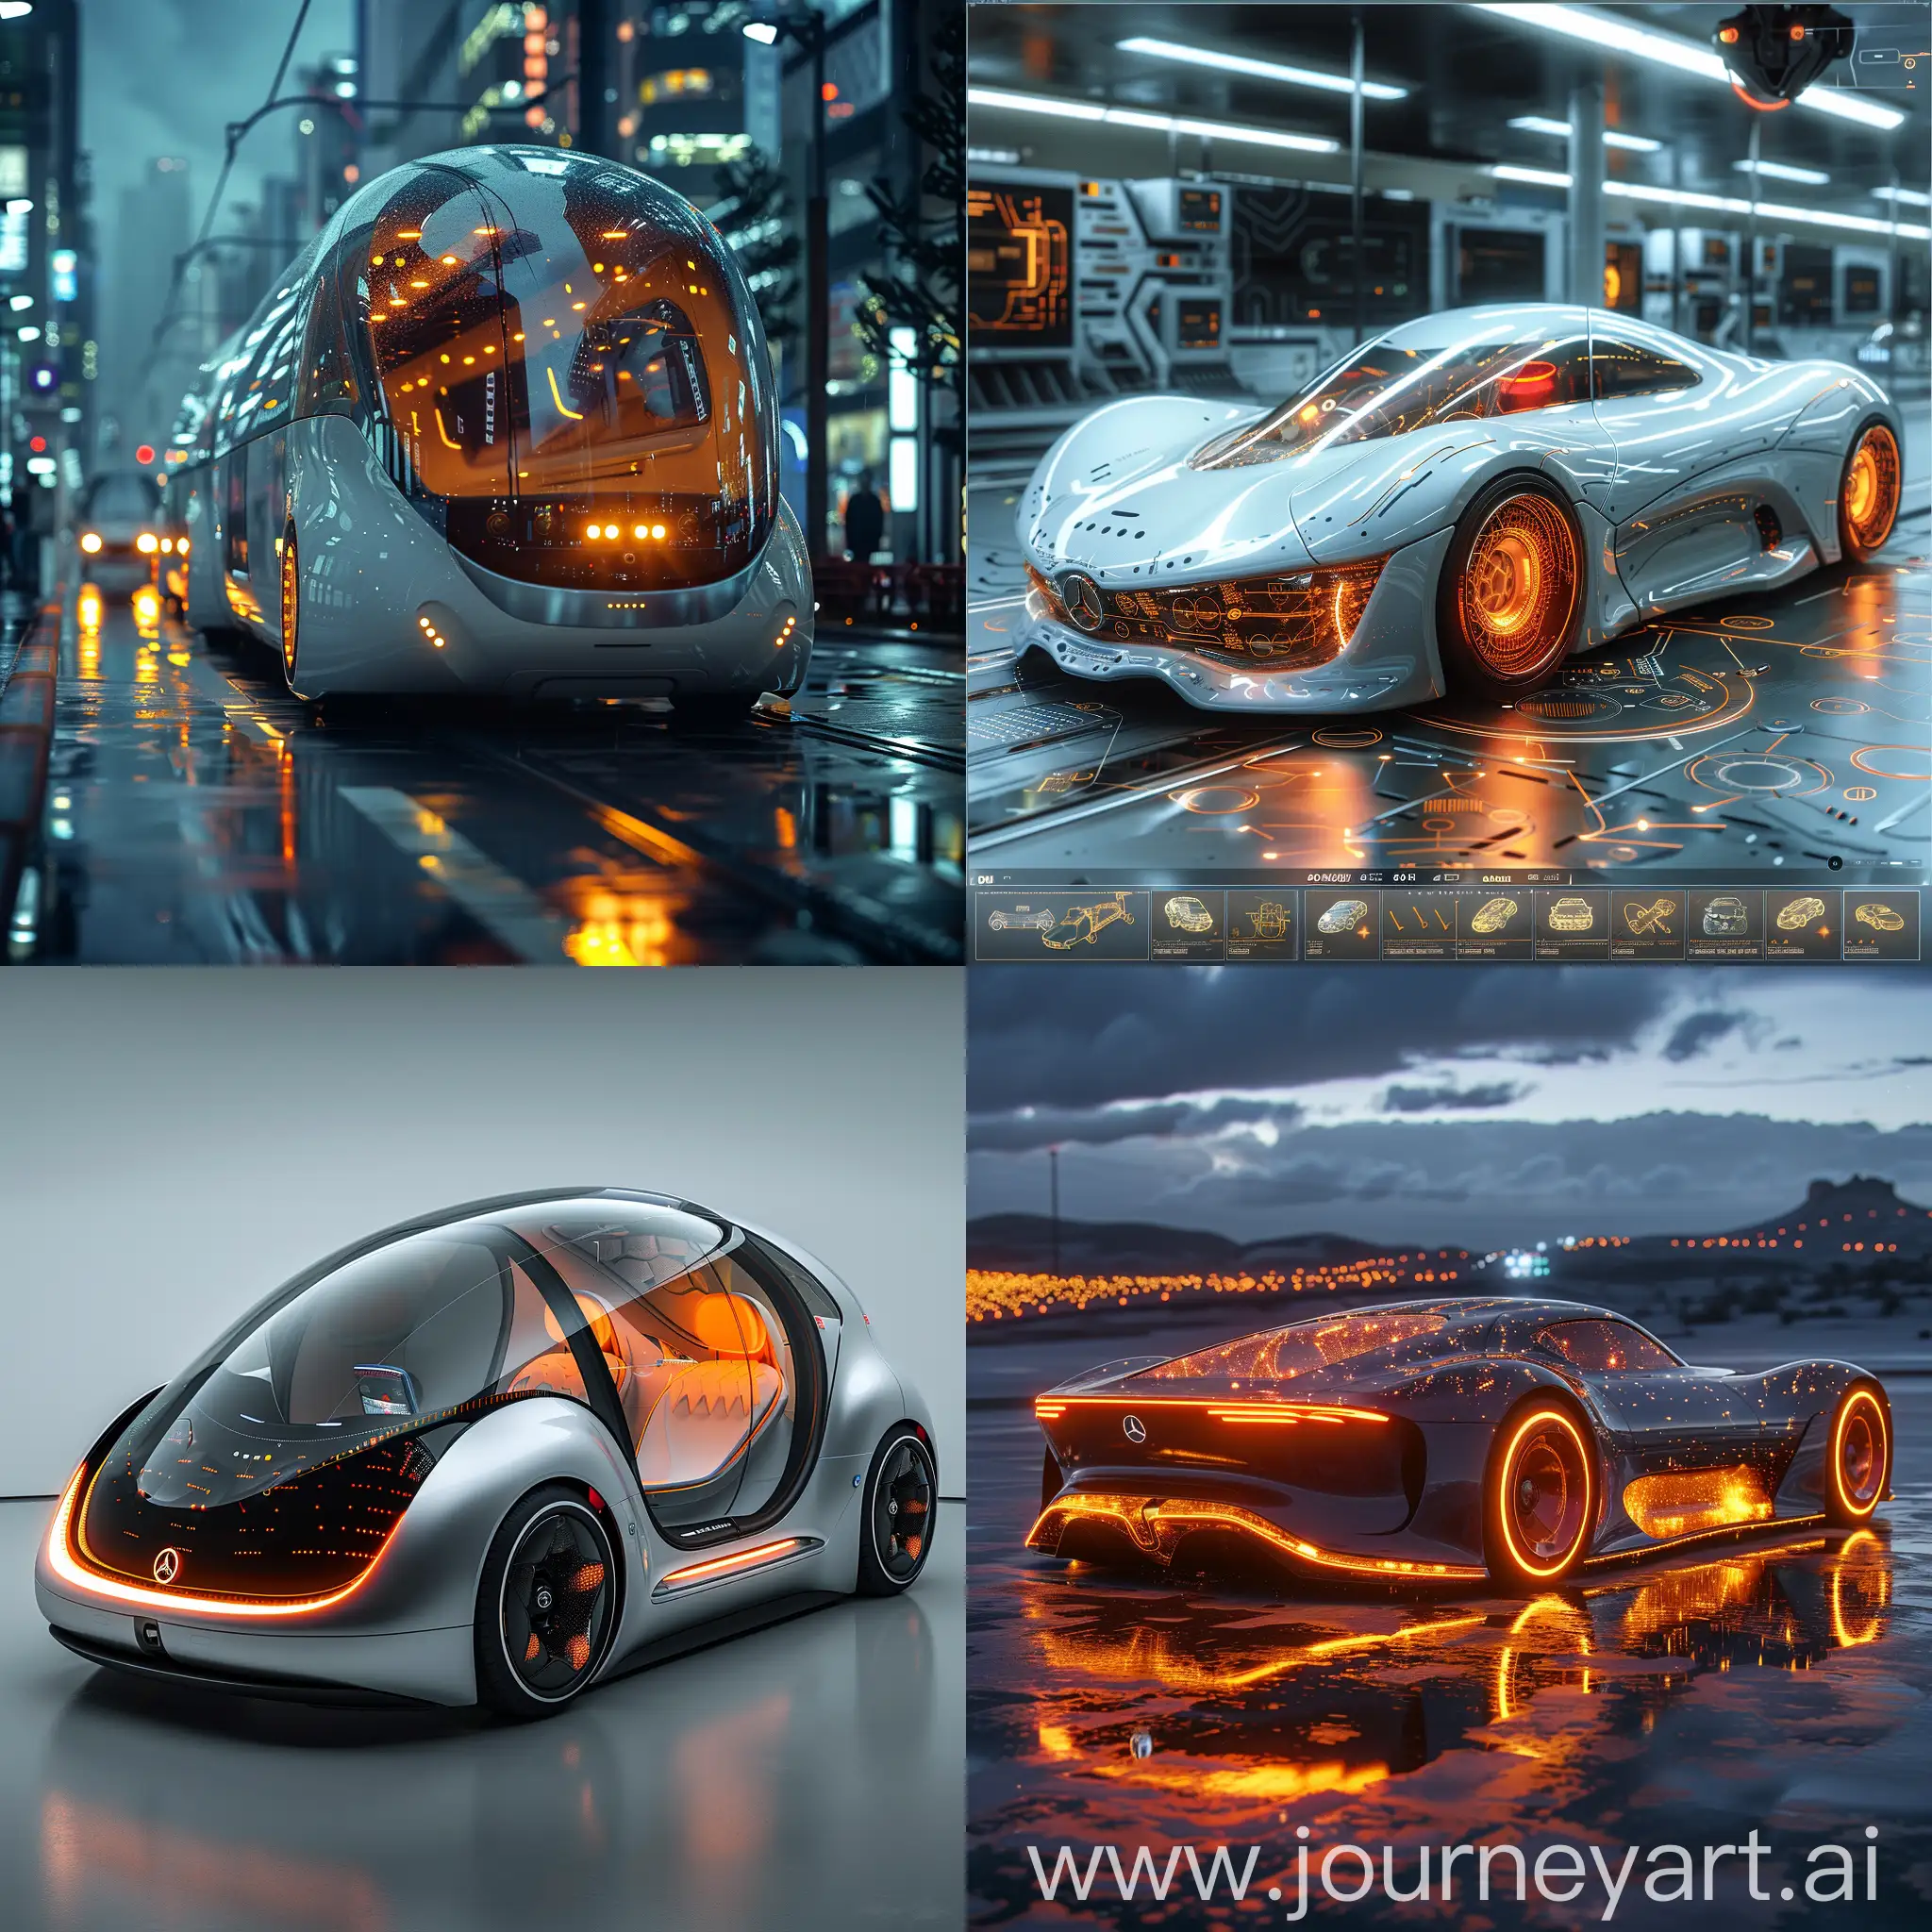 Futuristic car:: Autonomous Driving, Biometric Identification, Augmented Reality Windshield, Vehicle-to-Everything (V2X) Communication, Health Monitoring System, Self-Healing Materials, Energy-Efficient Solar Panels, Holographic Display, Advanced AI Assistant, Remote Control and Summoning, Reinforced Safety Cage, Advanced Airbag System, Collision Avoidance System, Energy-Absorbing Materials, Side-Impact Protection, Pedestrian Detection System, Roll-Over Protection, Crash-Tested Design, Emergency Response System, Fire Suppression System, Advanced Composite Materials, Reinforced Chassis, High-Strength Steel, Impact-Resistant Glass, Multi-Point Safety Belt, Reinforced Roof Structure, Heavy-Duty Braking System, All-Wheel Drive System, Off-Road Capability, Corrosion-Resistant Coatings, octane render --stylize 1000